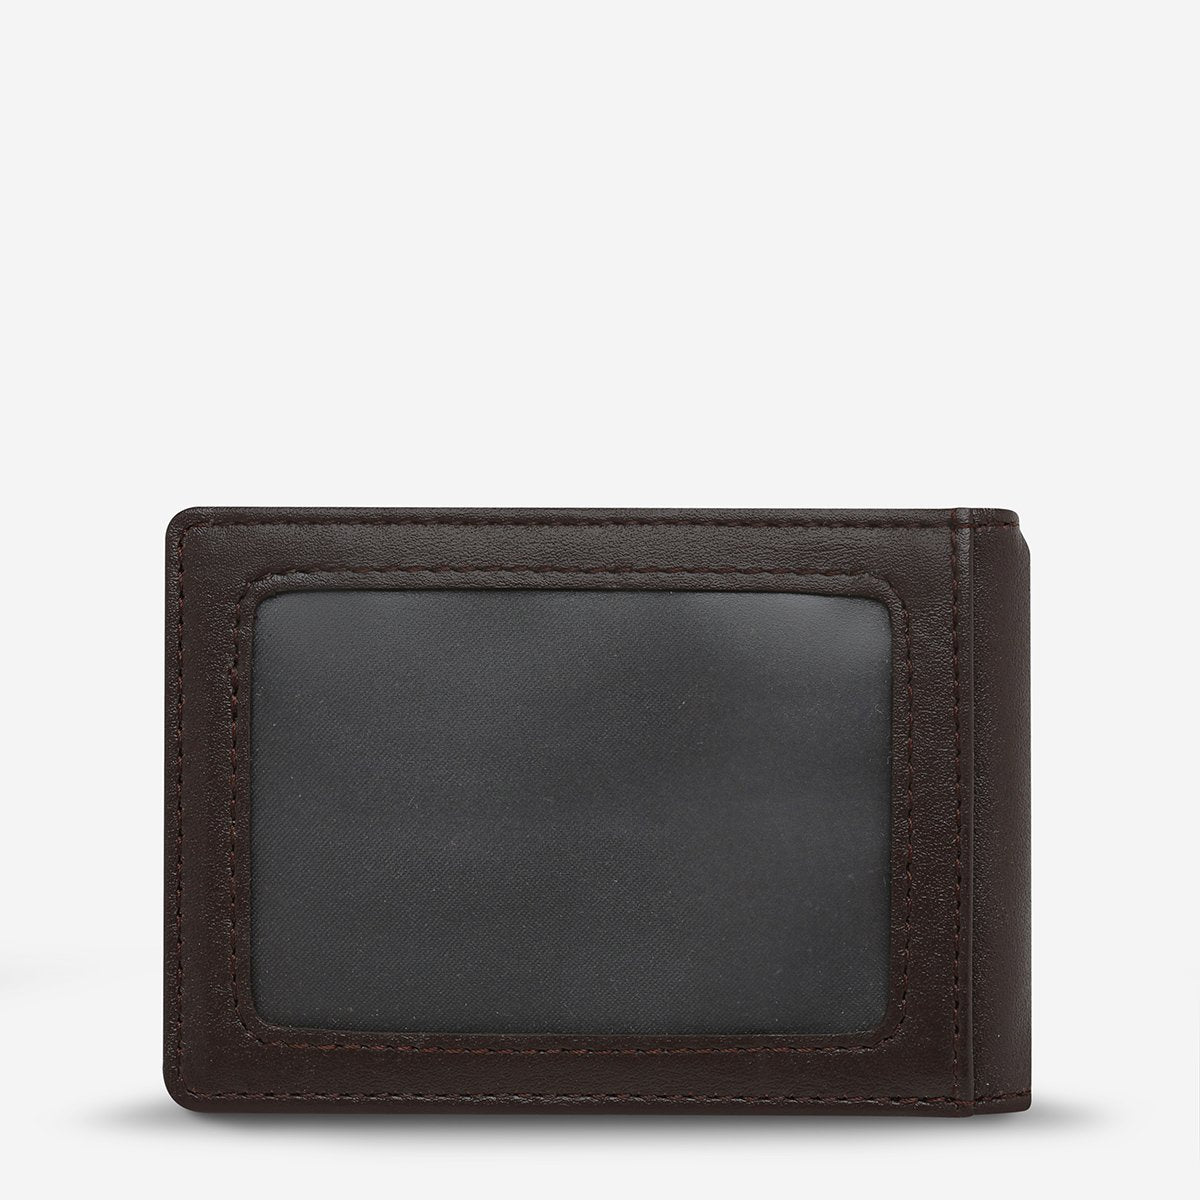 Status Anxiety - Melvin Wallet in Chocolate